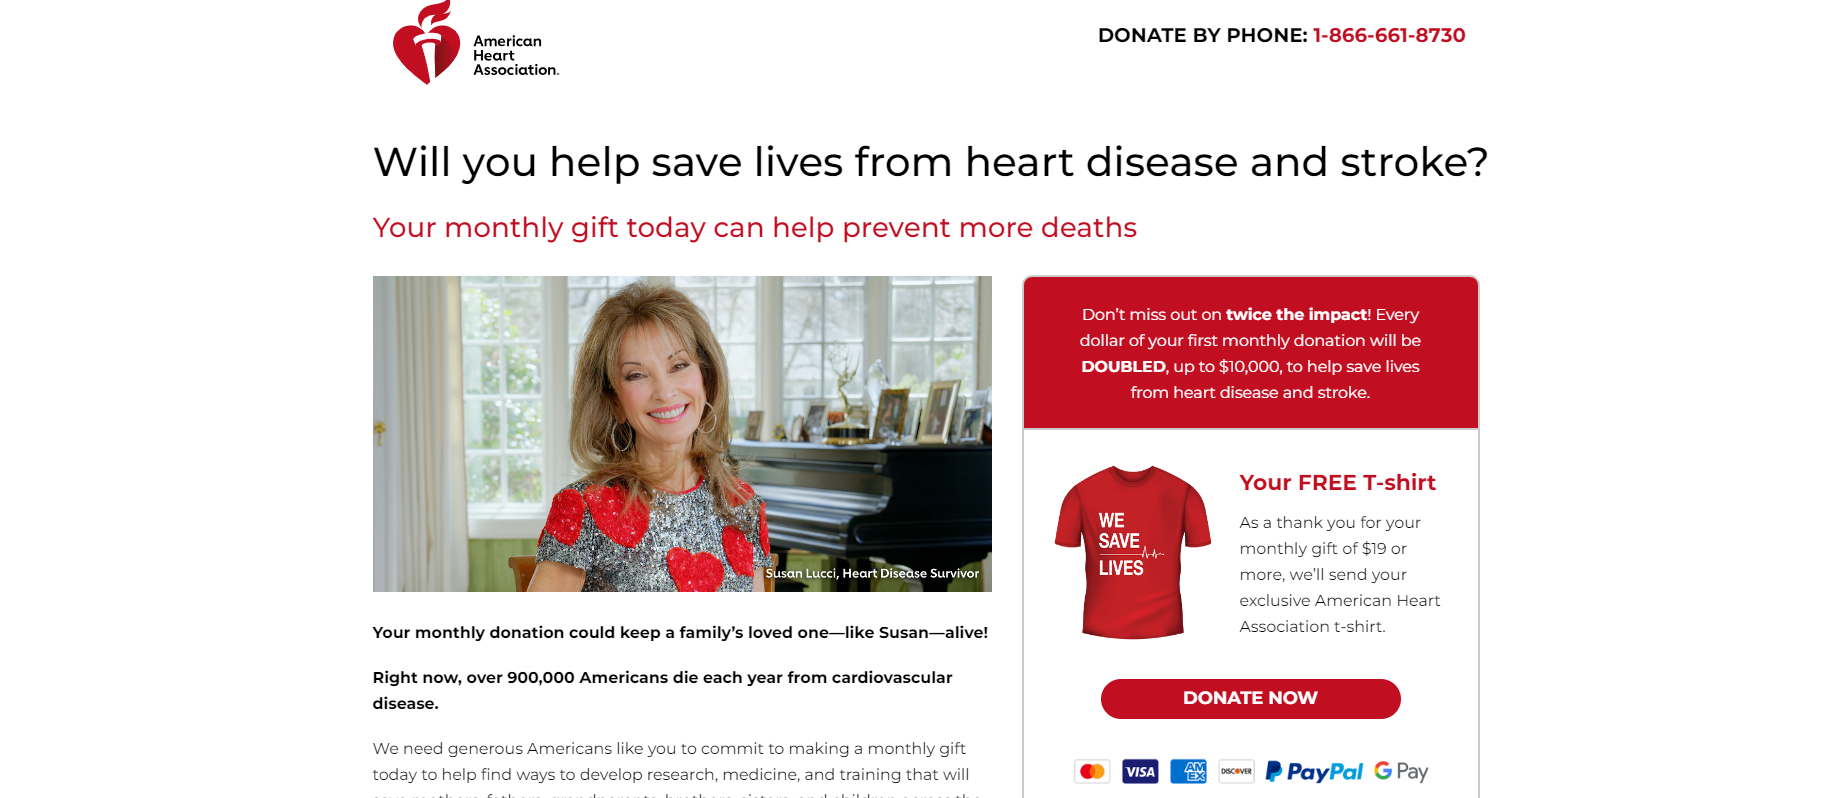 The monthly giving page for the American Heart Association, which highlights the opportunity to have gifts matched for double the impact.